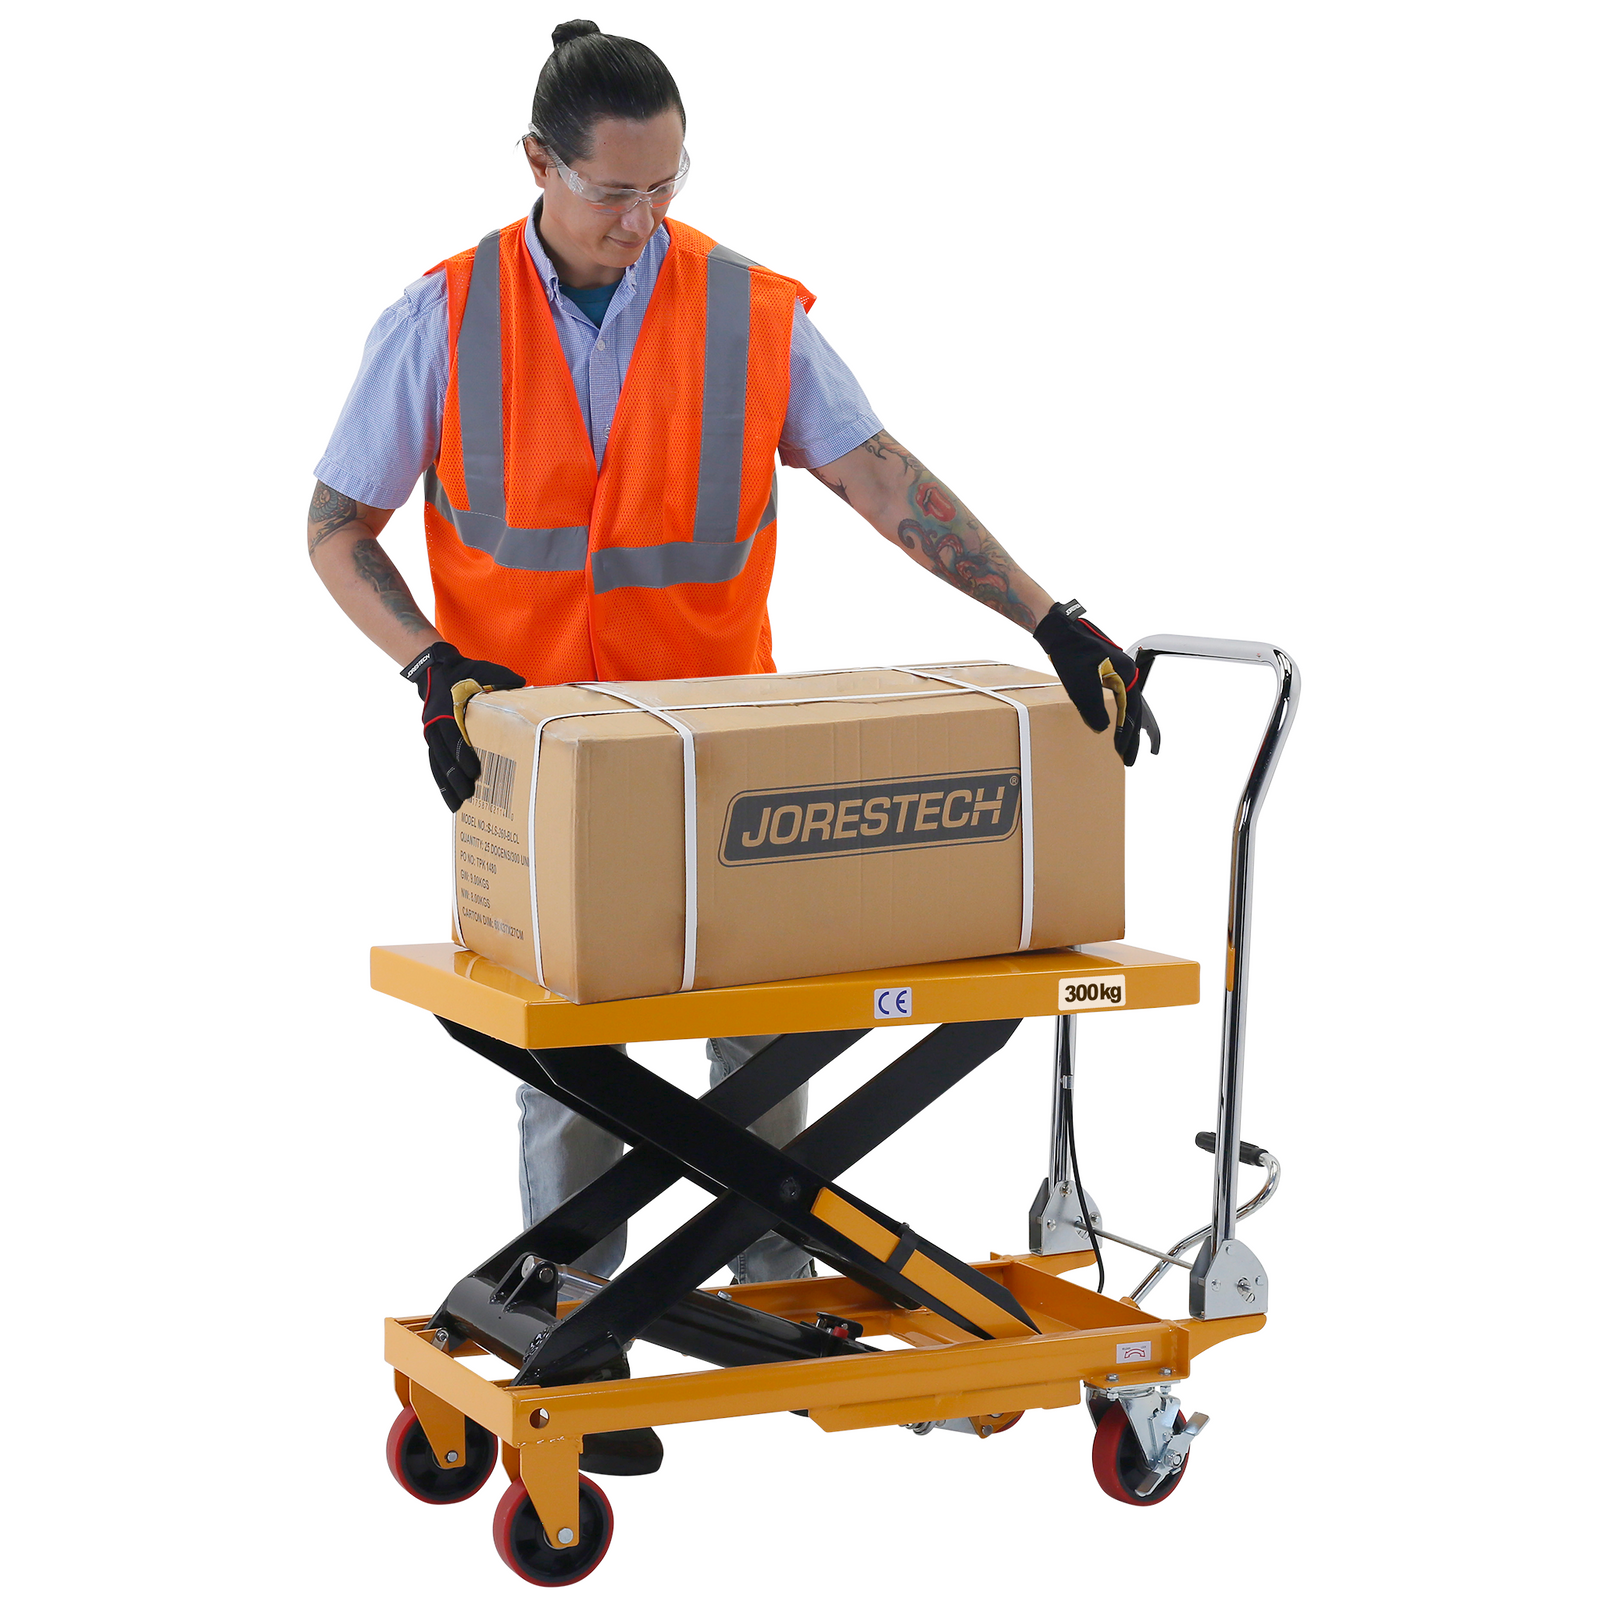 A man wearing an orange safety vest is removing a heavy box from the JORES TECHNOLOGIES® table lift at a comfortable height because the table is lifted